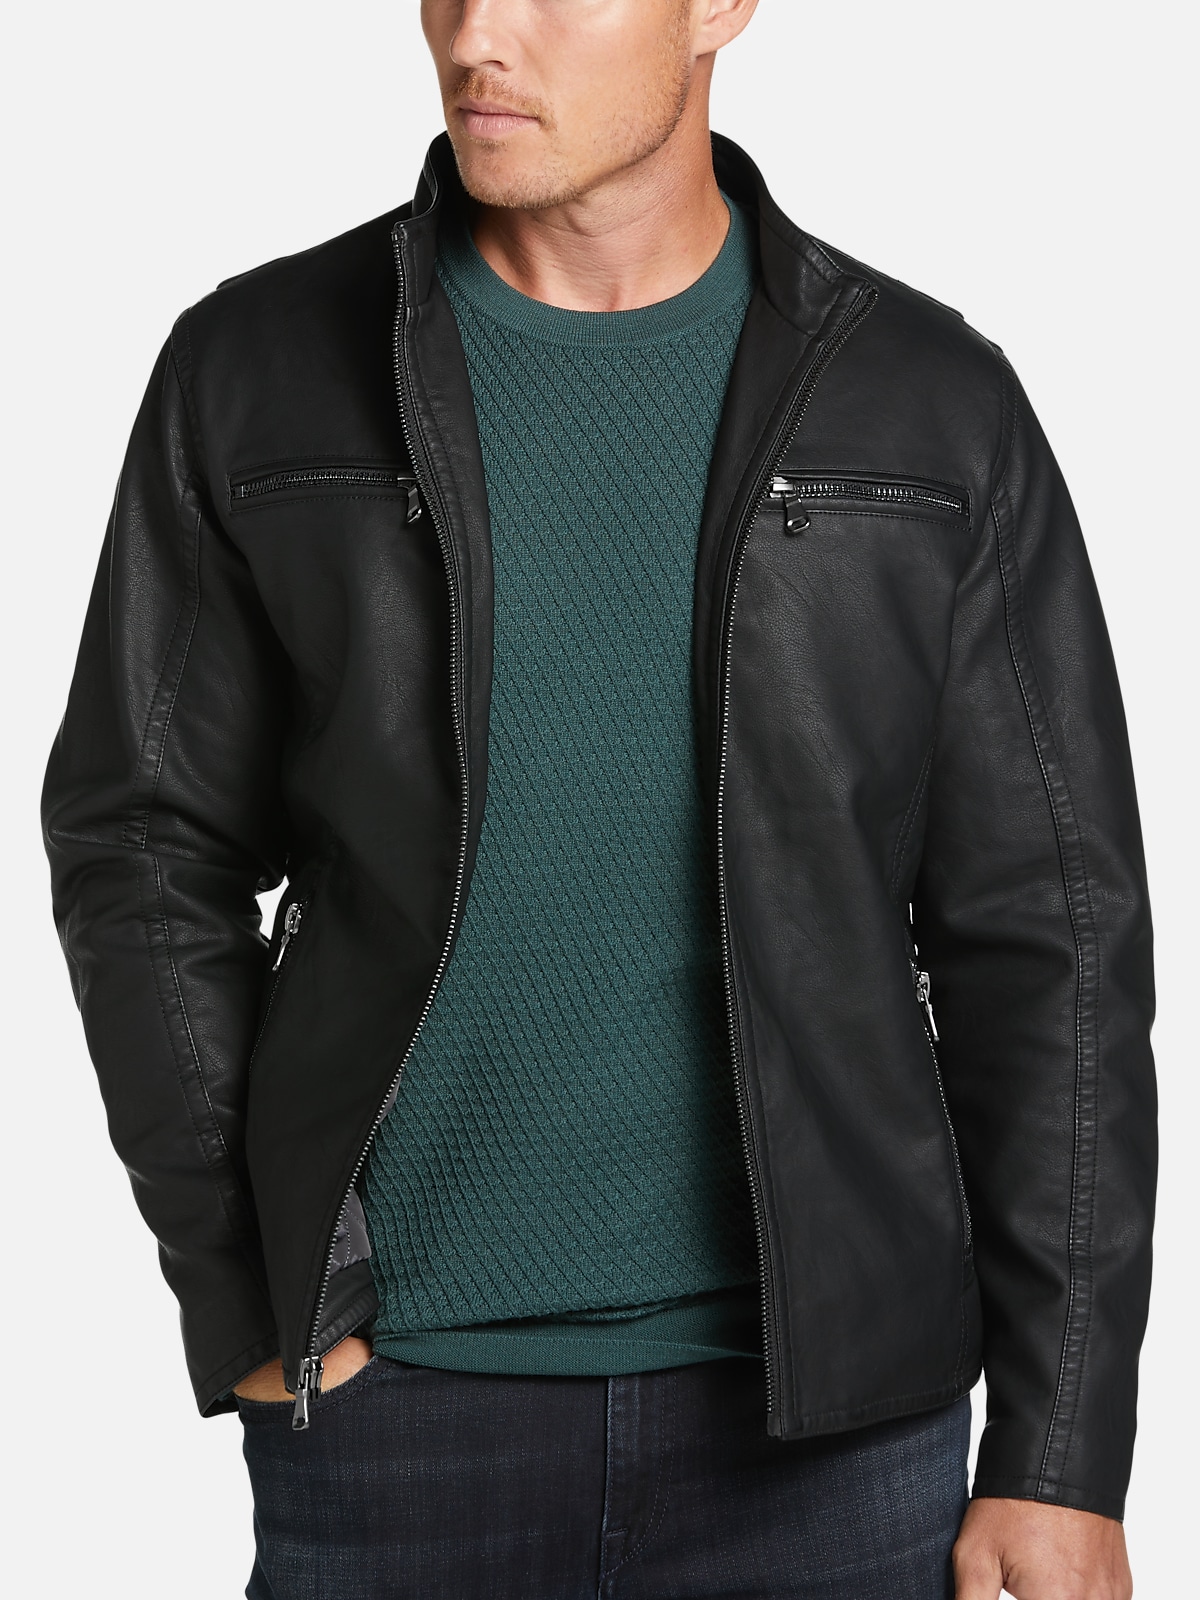 Awearness Kenneth Cole Modern Fit Faux Leather Jacket | Best Sellers ...